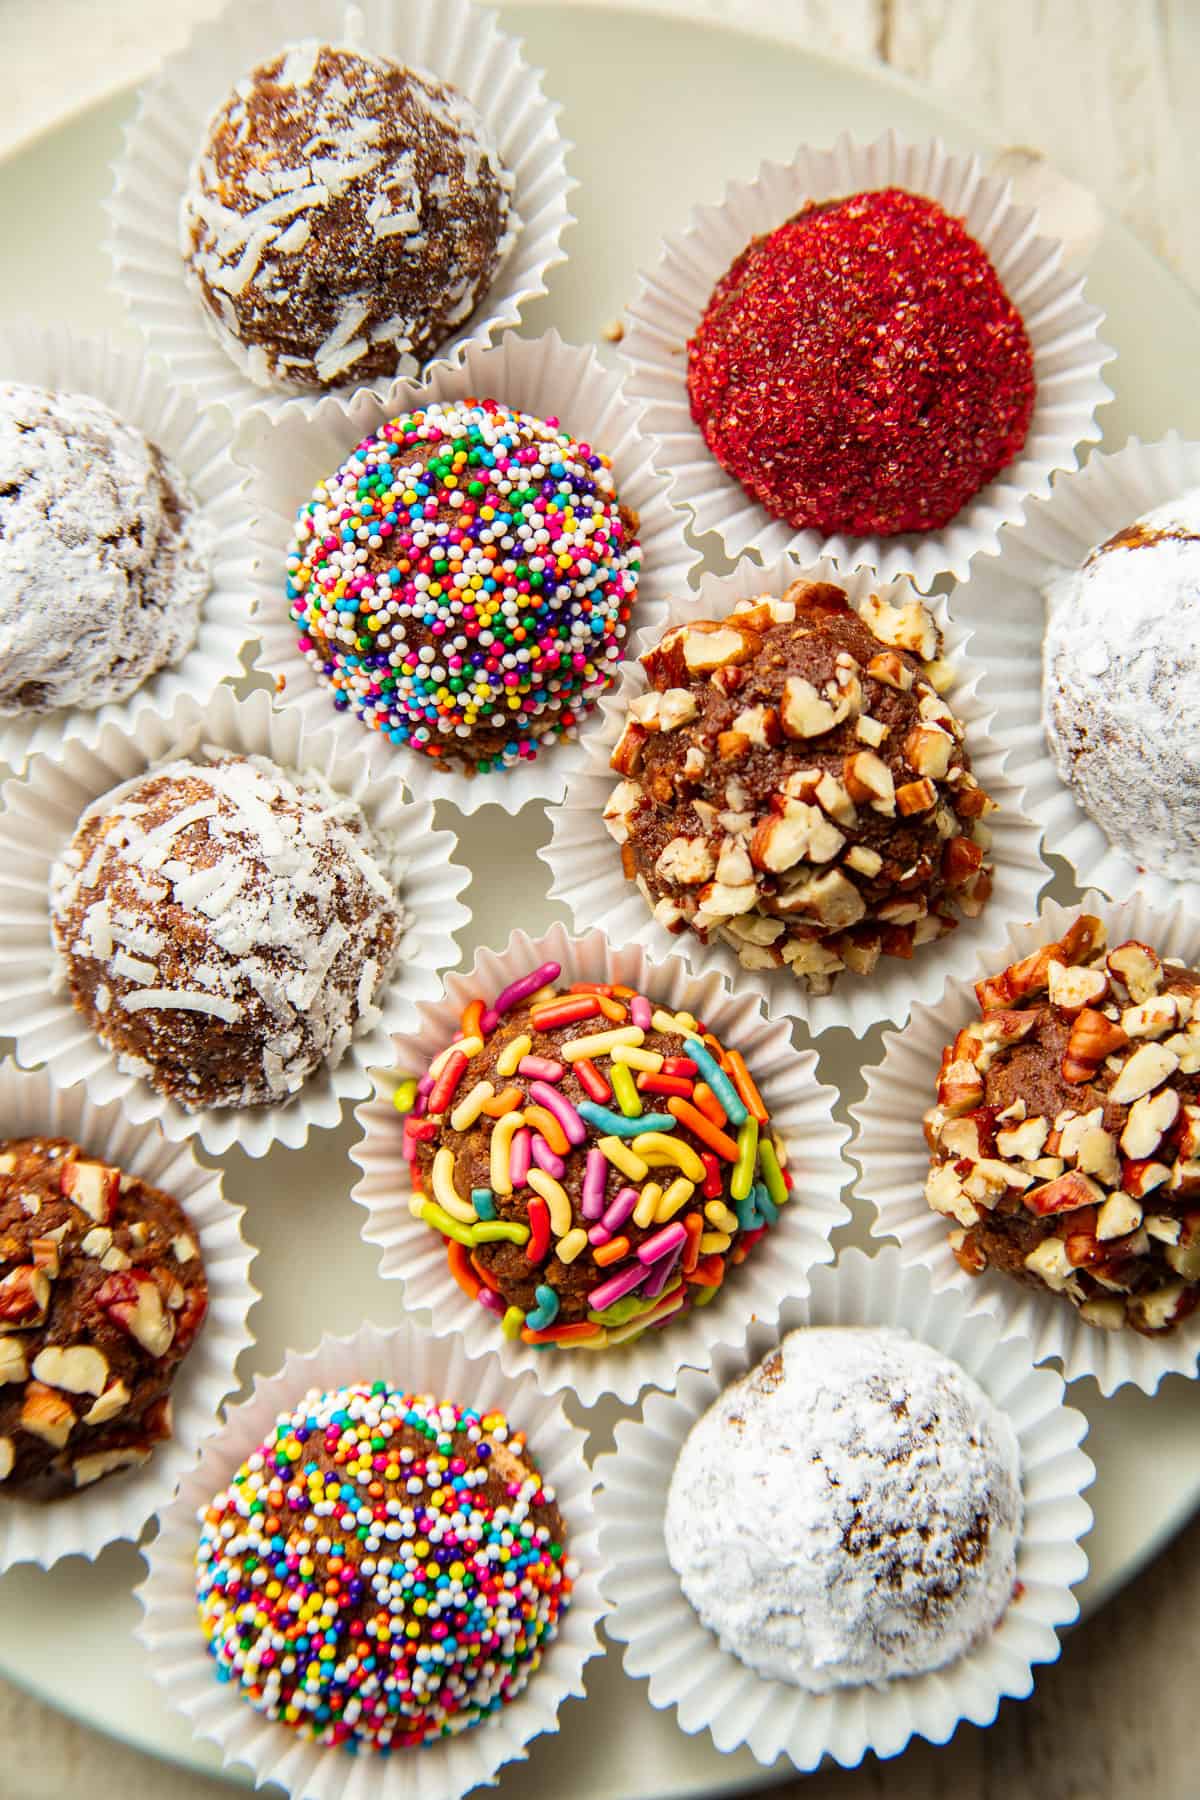 Vegan Rum Balls with various toppings on a white plate.